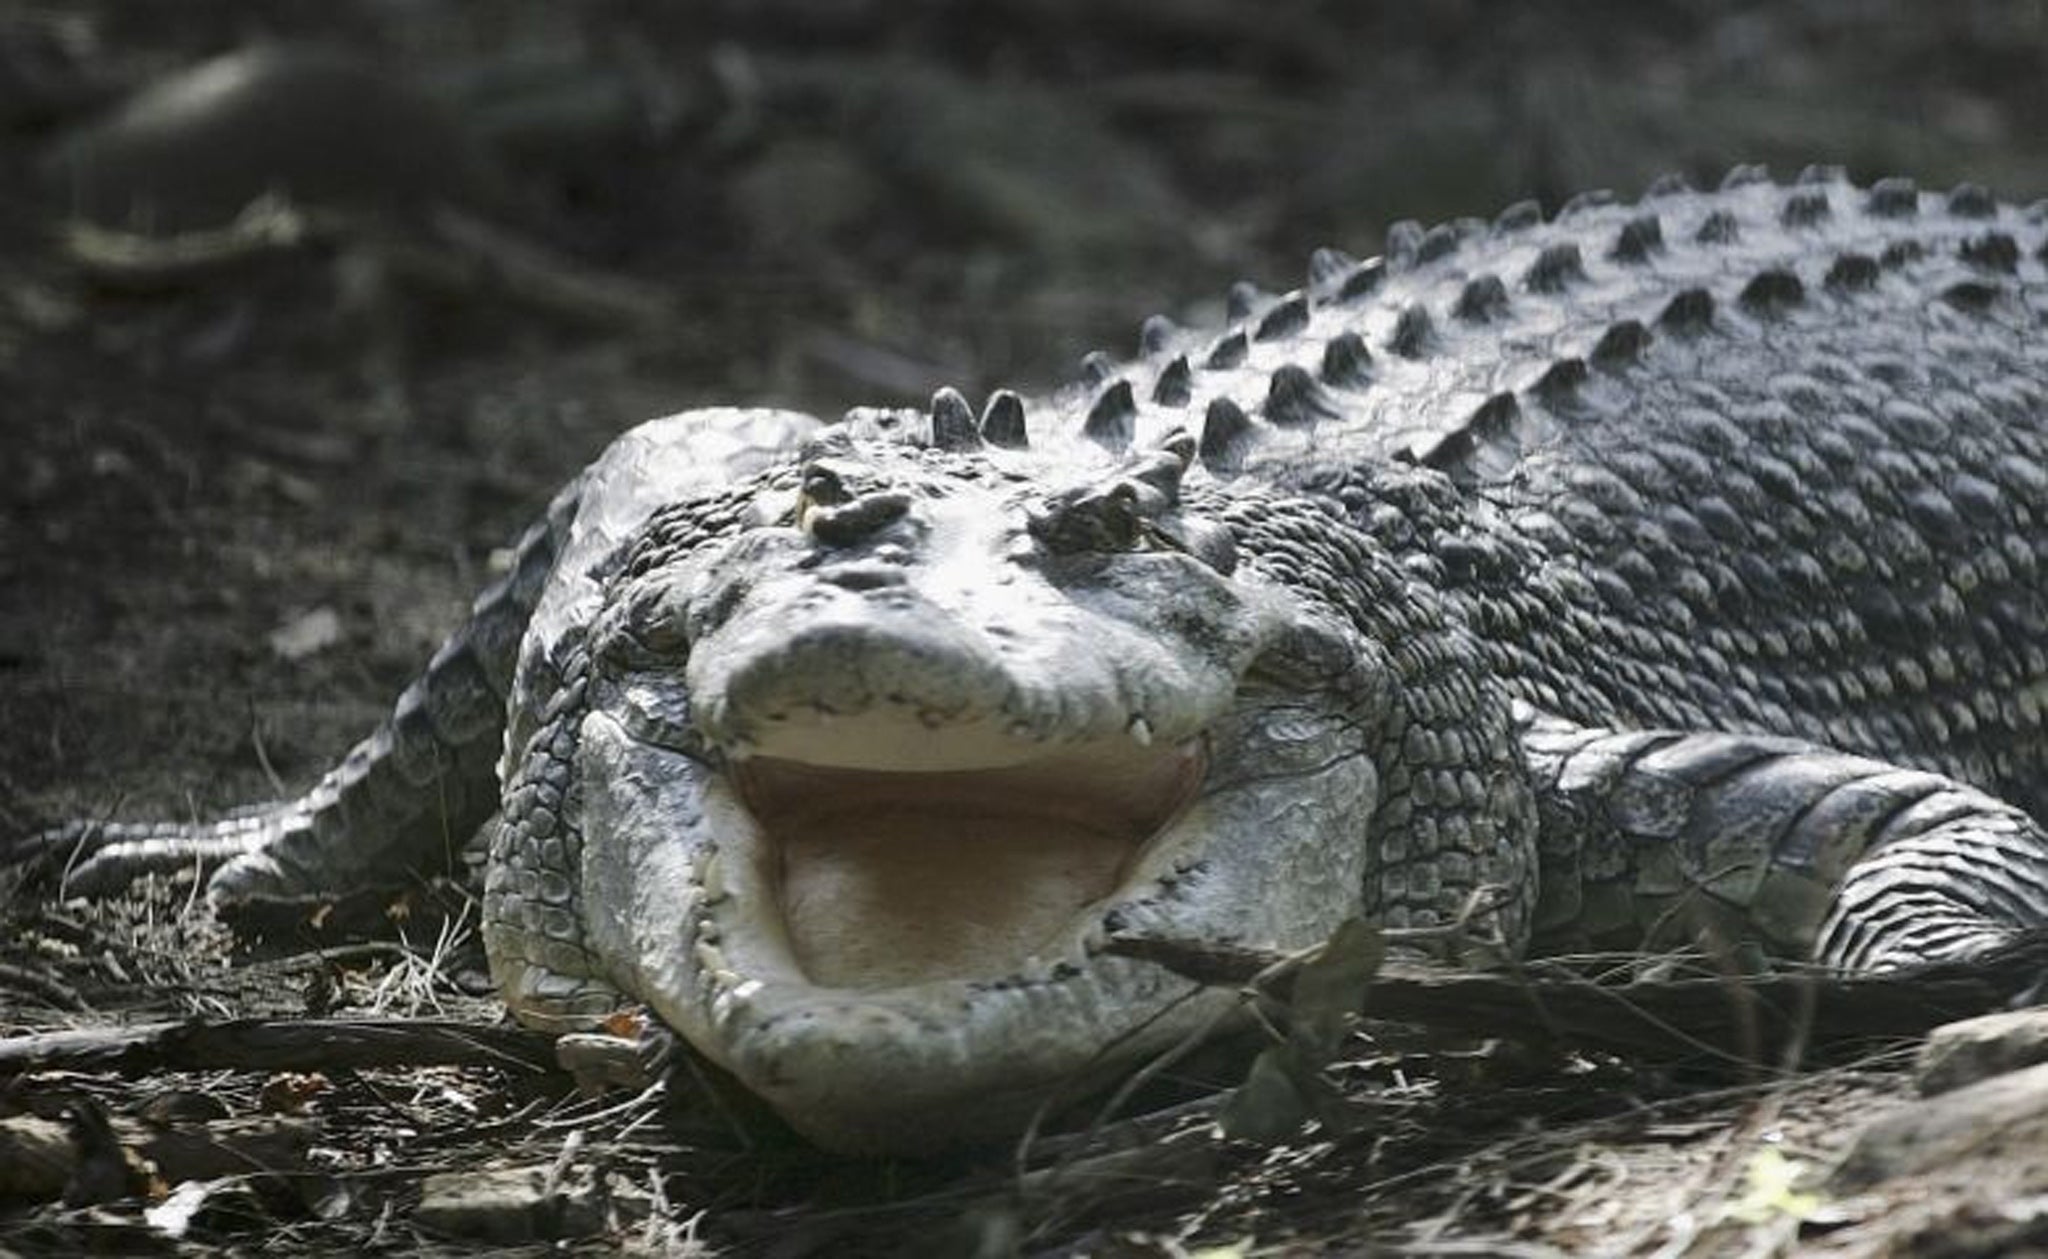 golfer-attacked-by-crocodile-as-he-tries-to-retrieve-ball-from-pond-on